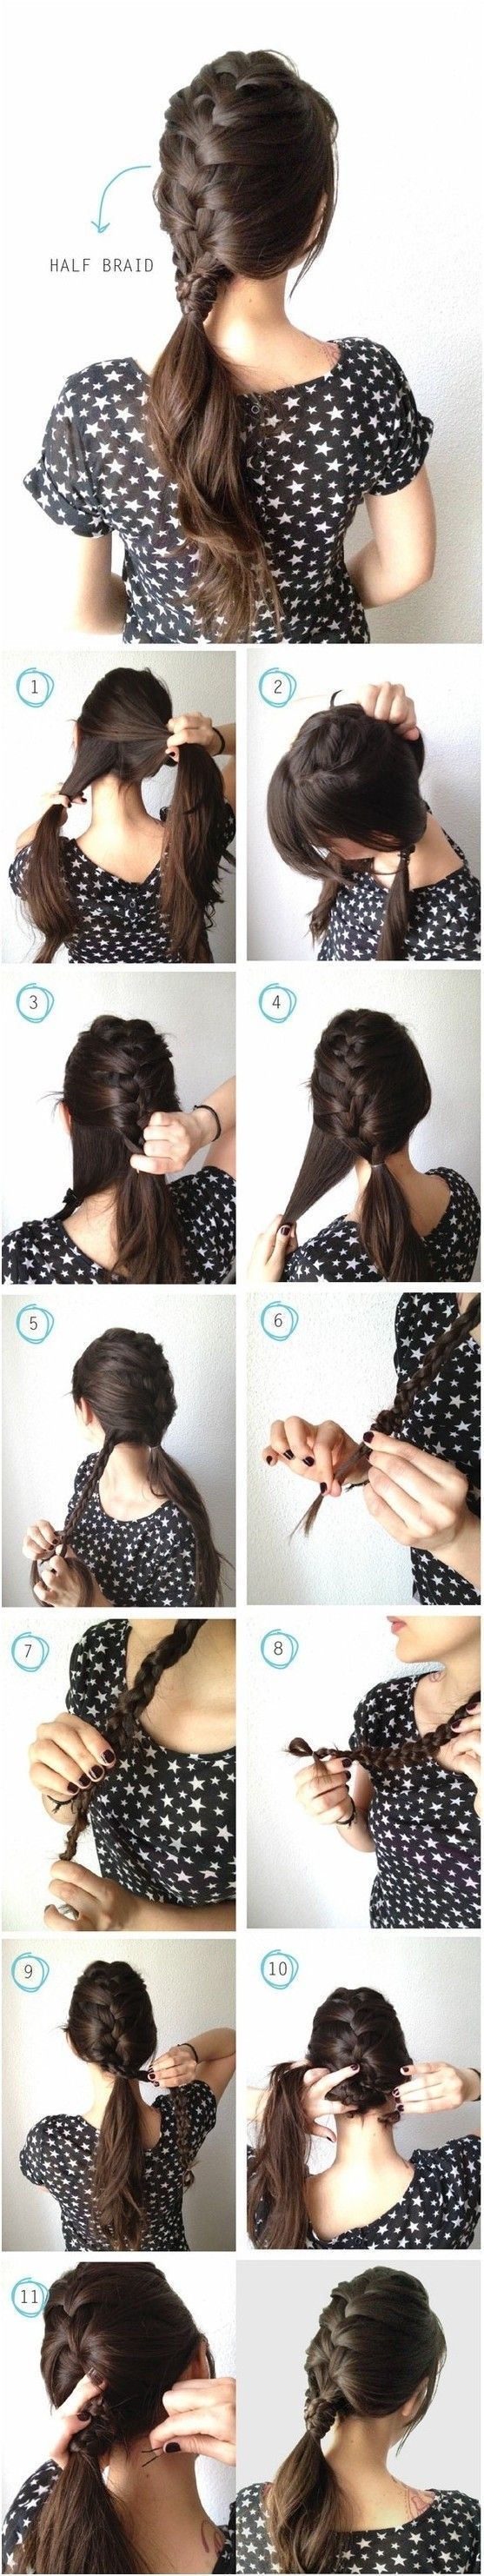 DIY Hairstyle | Quick and Easy Hair Tutorial For Work by Makeup Tutorials at mak...